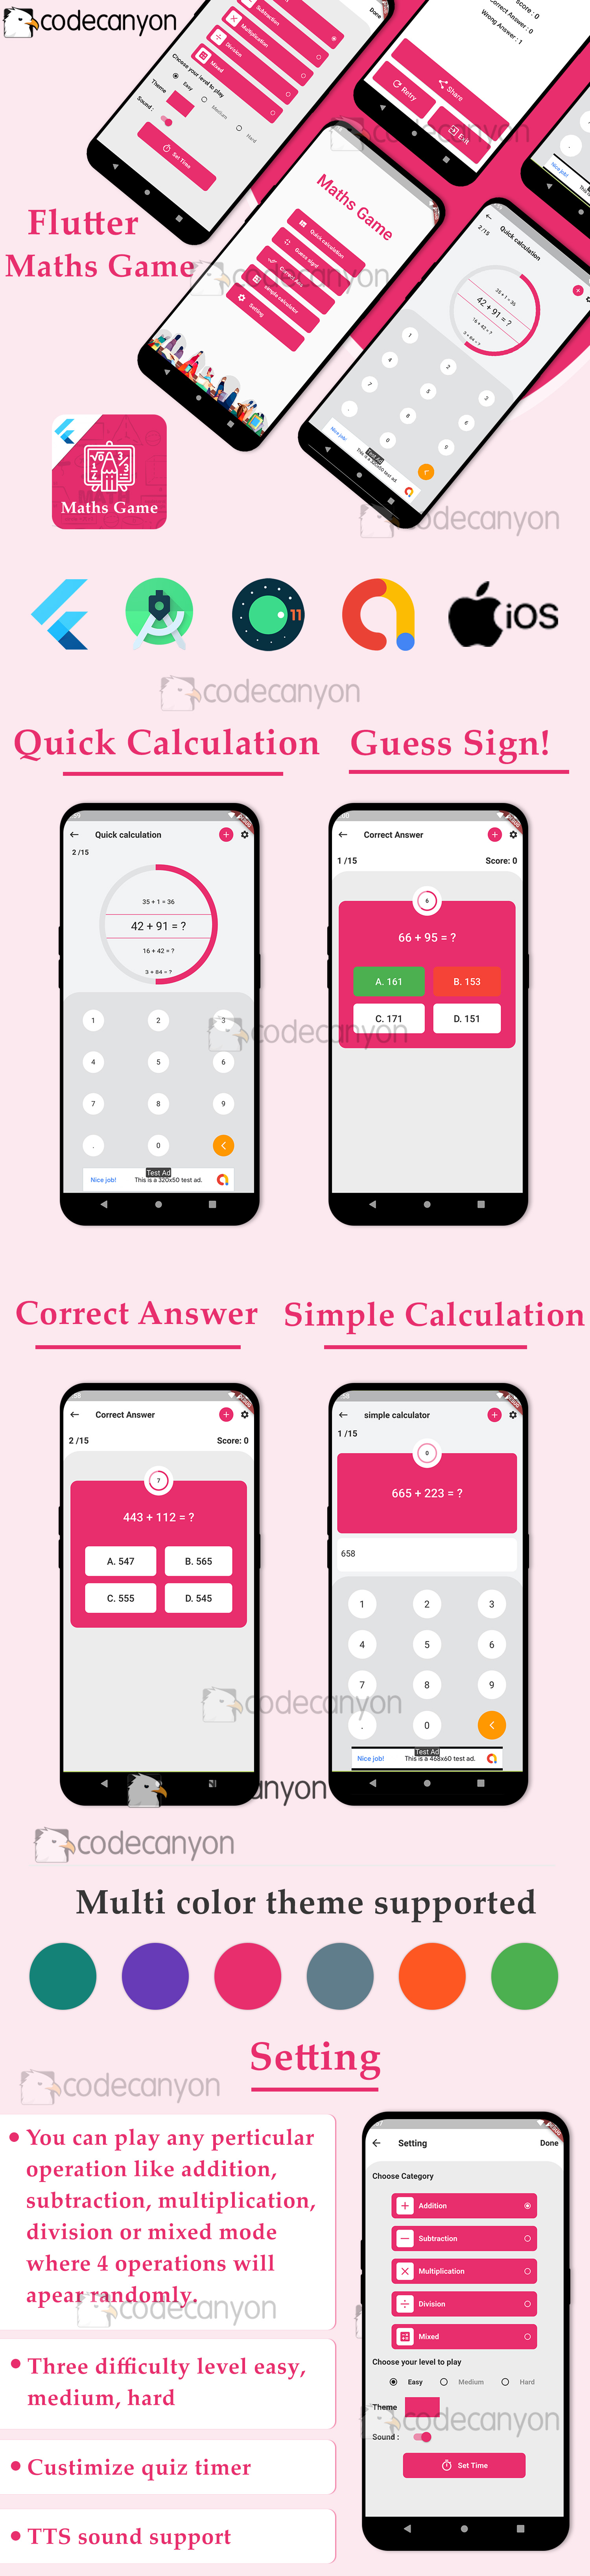 Flutter maths games 4 in 1 with admob ready to publish template - 10